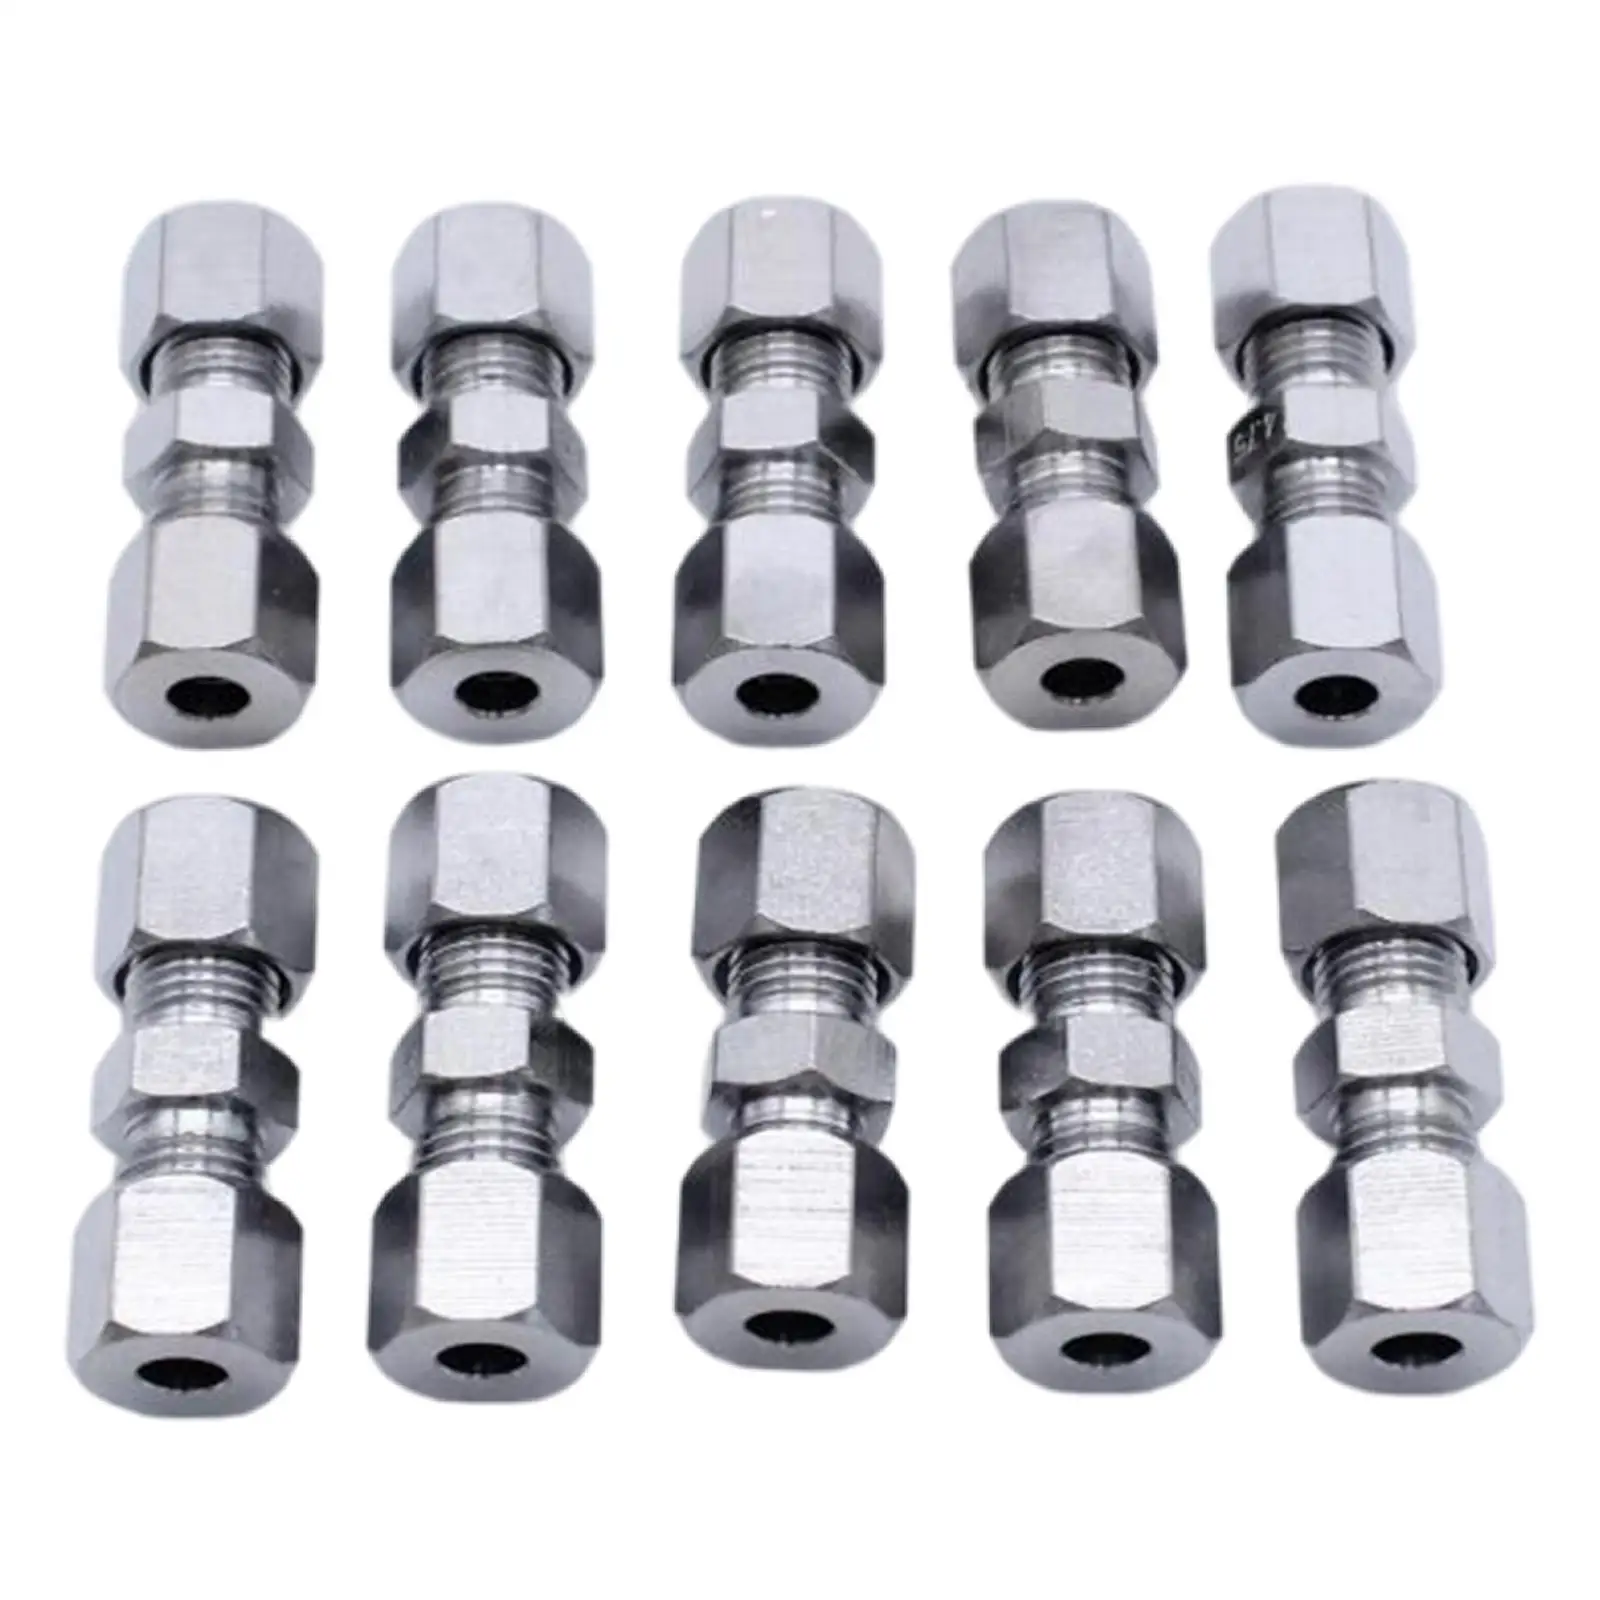 Brake Line Connector 3/16 inch Fittings Assortment 10Pcs Compression Union Adapter Fits for 3/16 inch Tube 4.75mm Brake Line